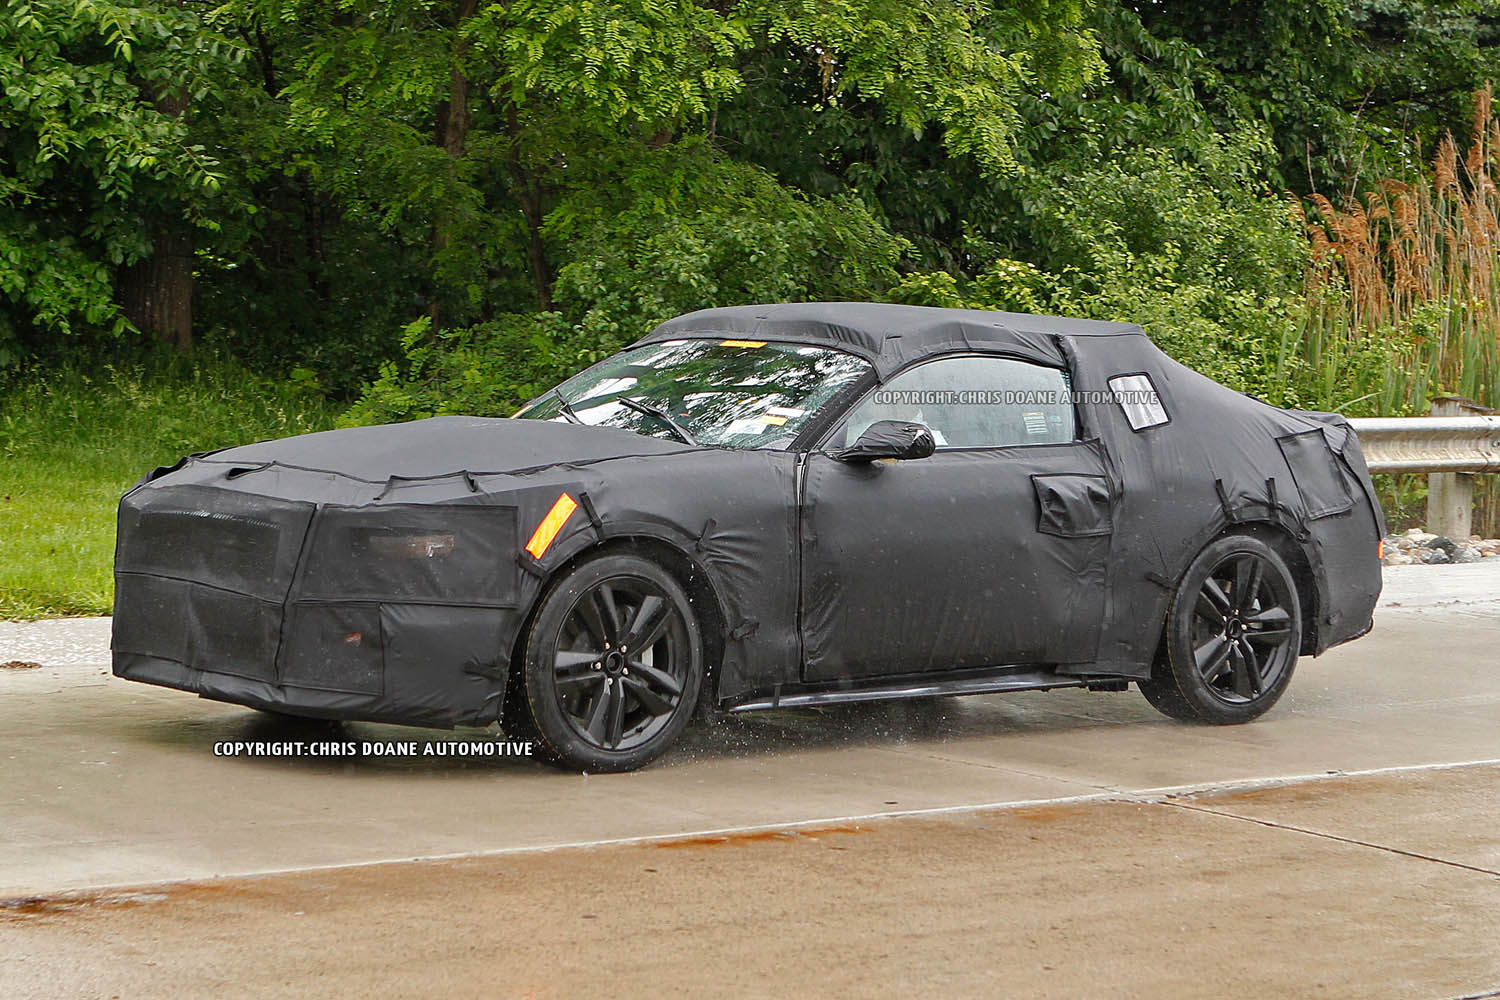 The Master of Disguise - How the 2015 Mustang was kept under wraps!